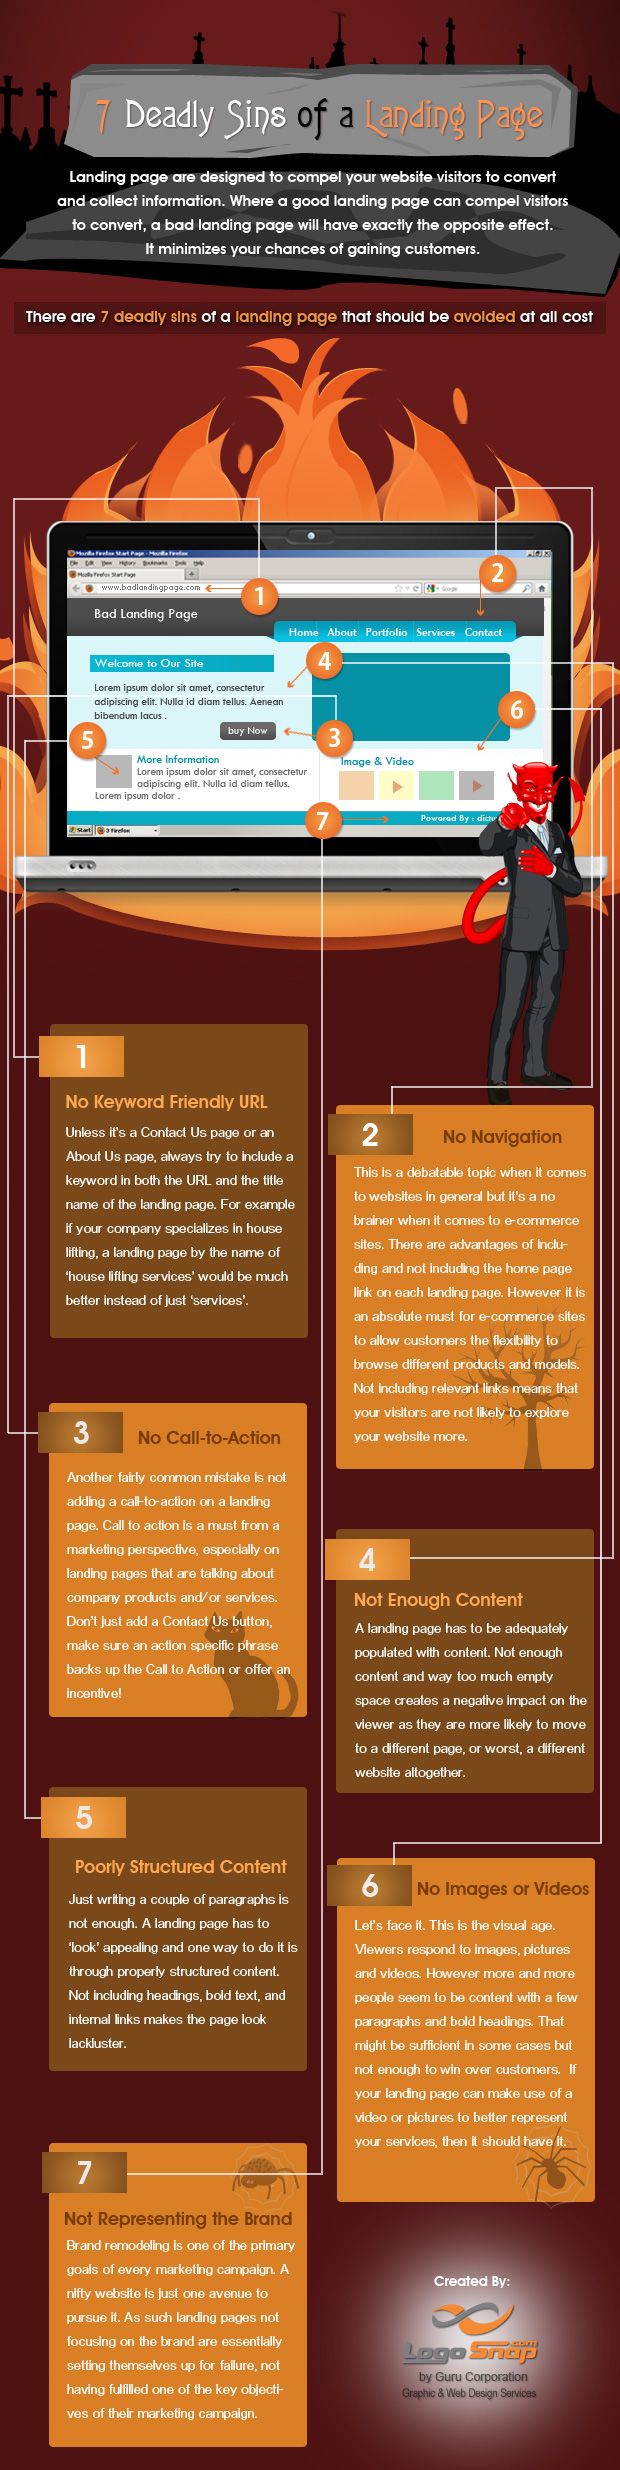 Advertising-Infographics-7-Deadly-Sins-of-a-LandingPage Advertising Infographics : 7 Deadly Sins of a #LandingPage